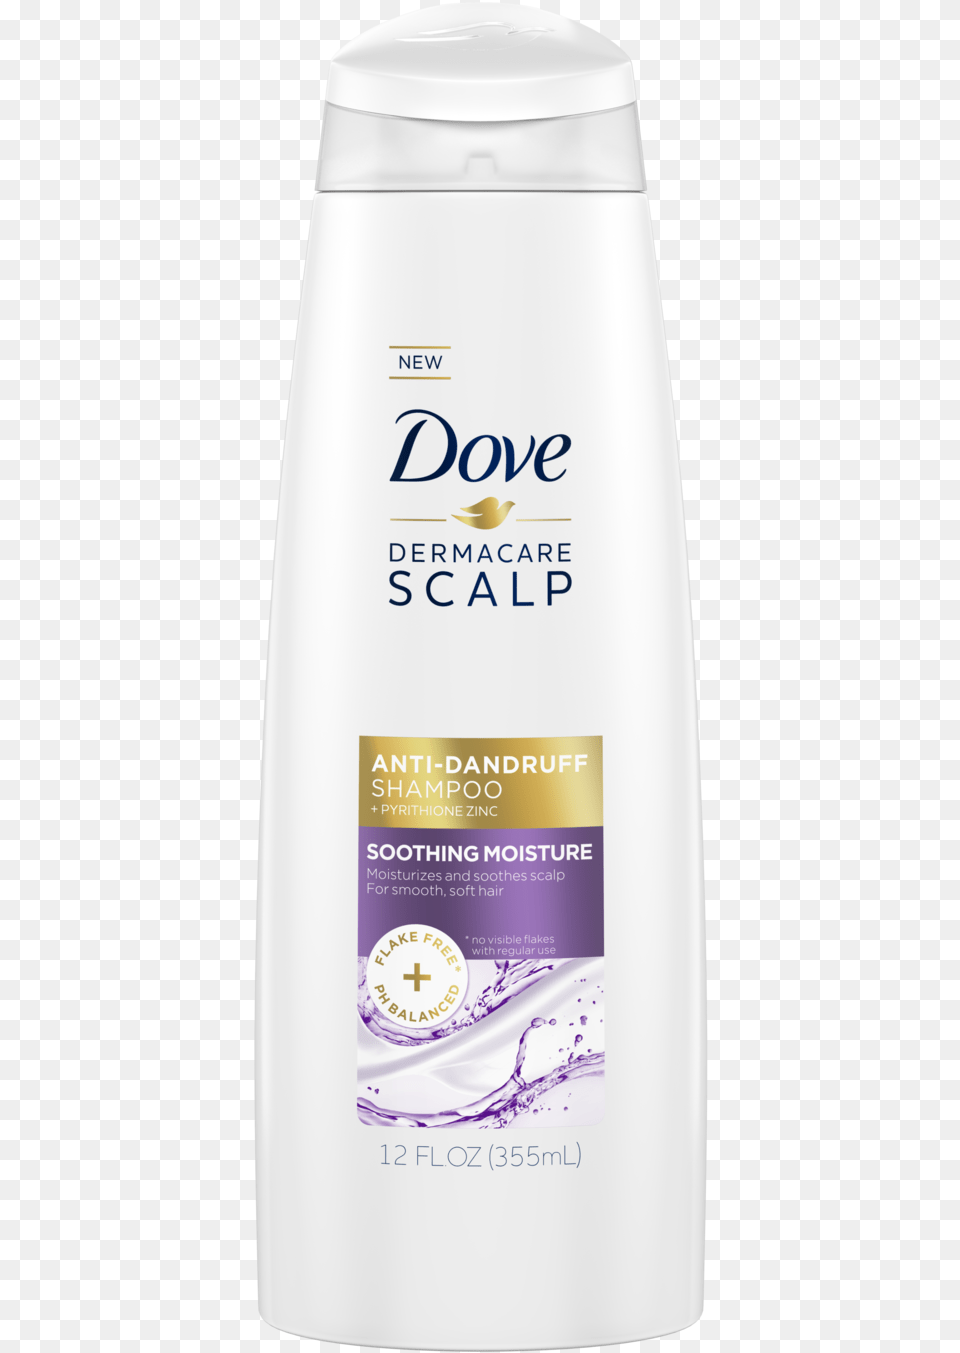 Dove Dermacare Scalp Soothing Moisture Anti Dandruff Dove Dermacare Scalp, Bottle, Cosmetics, Perfume Free Png